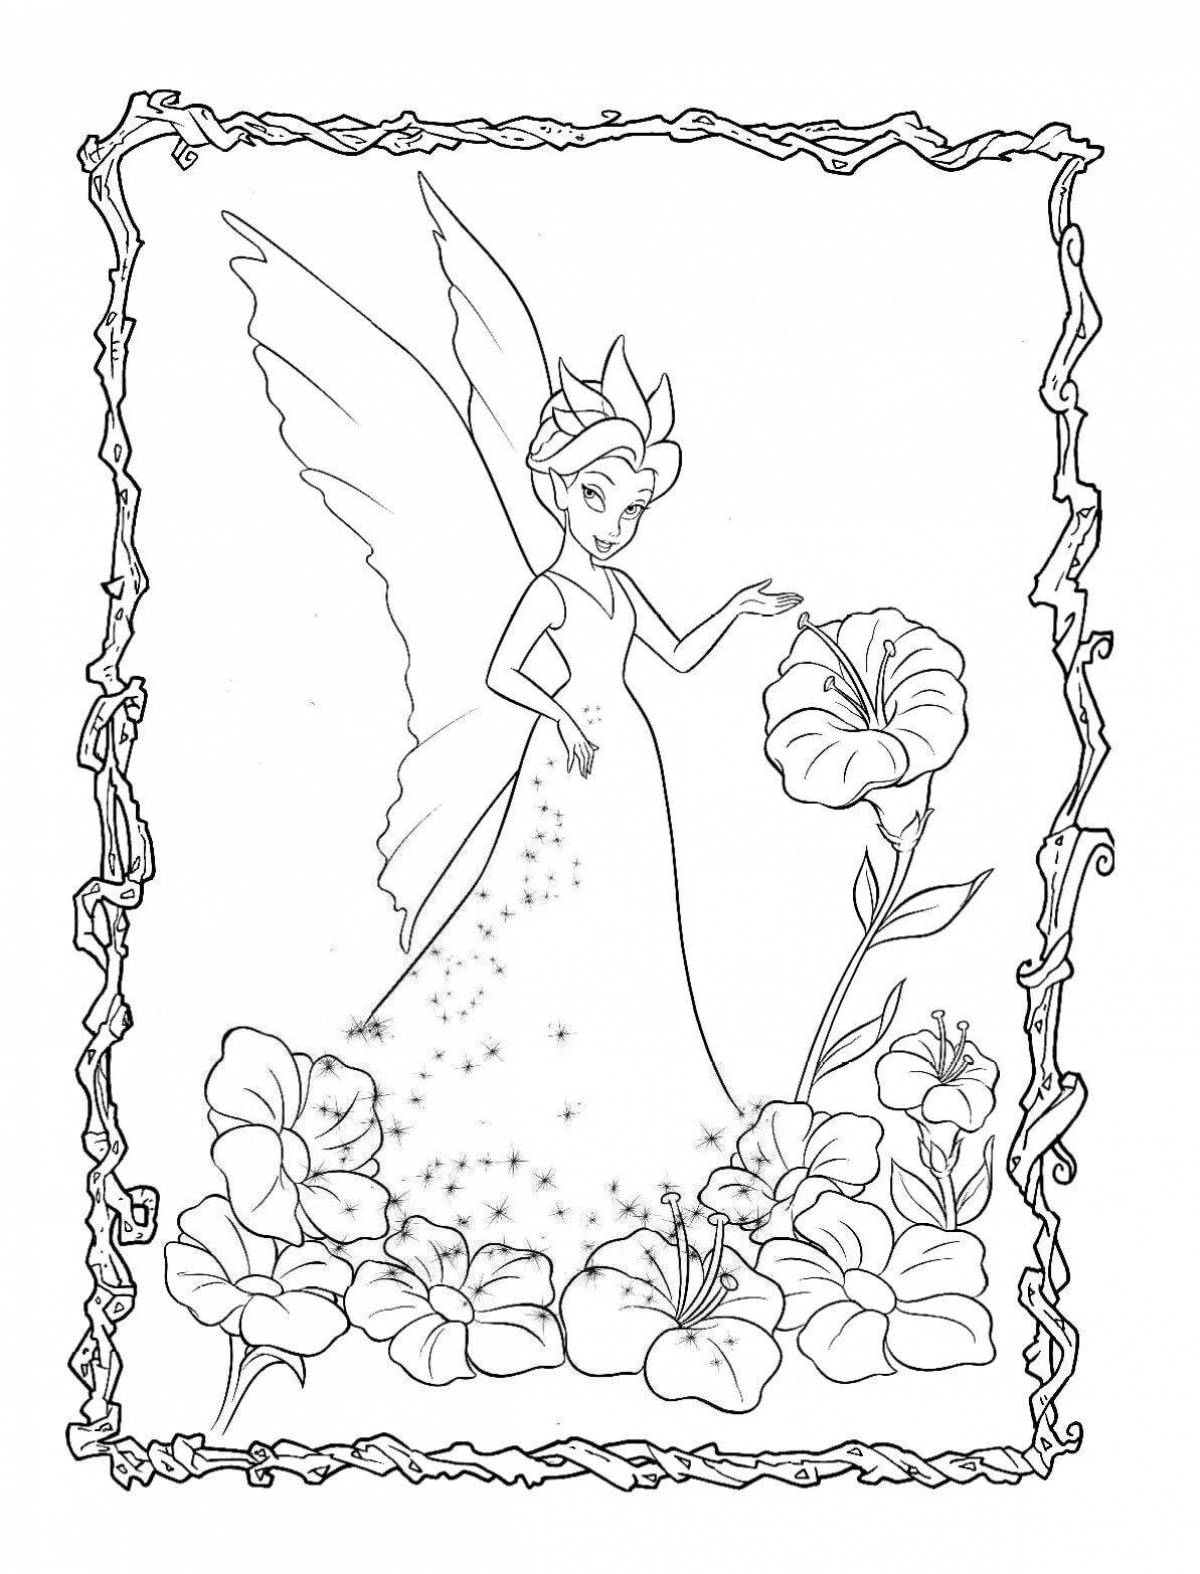 Radiant coloring page disney fairy with stickers